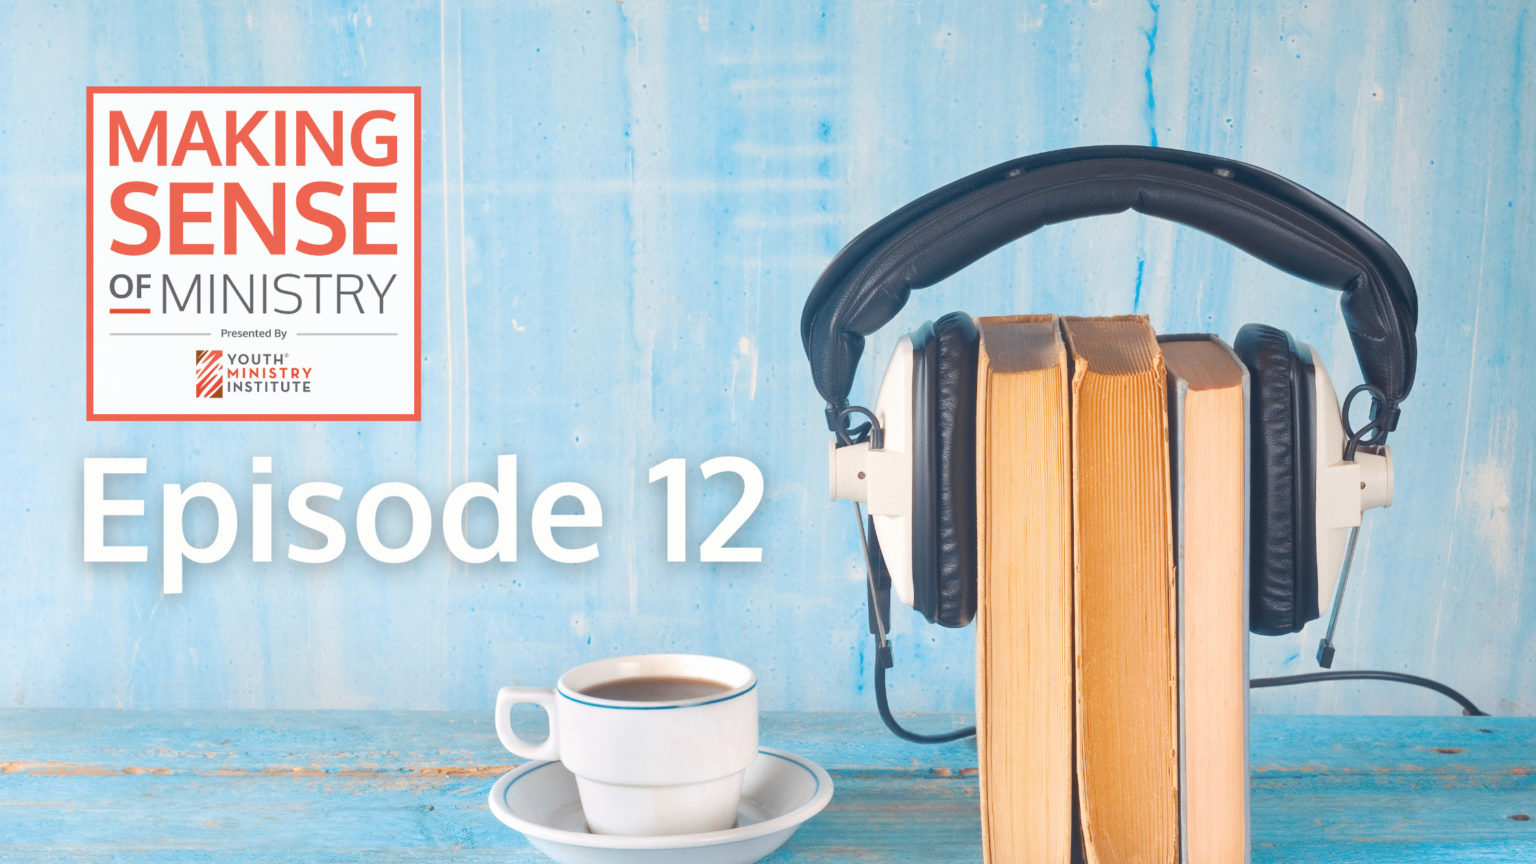 Episode 12 of the Making Sense of Ministry Podcast